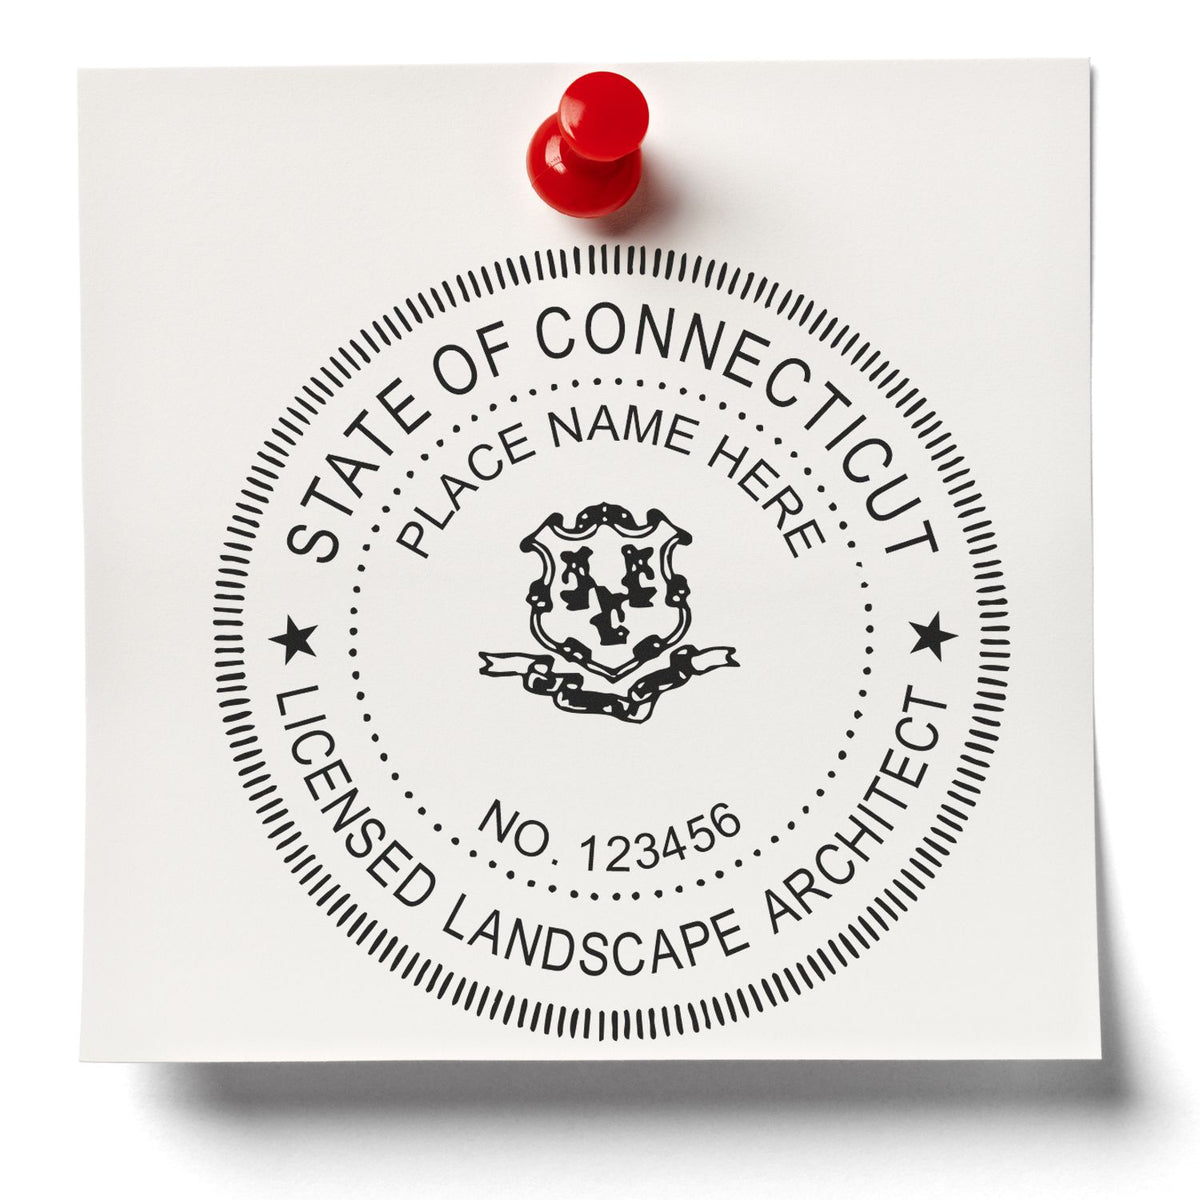 A lifestyle photo showing a stamped image of the Connecticut Landscape Architectural Seal Stamp on a piece of paper